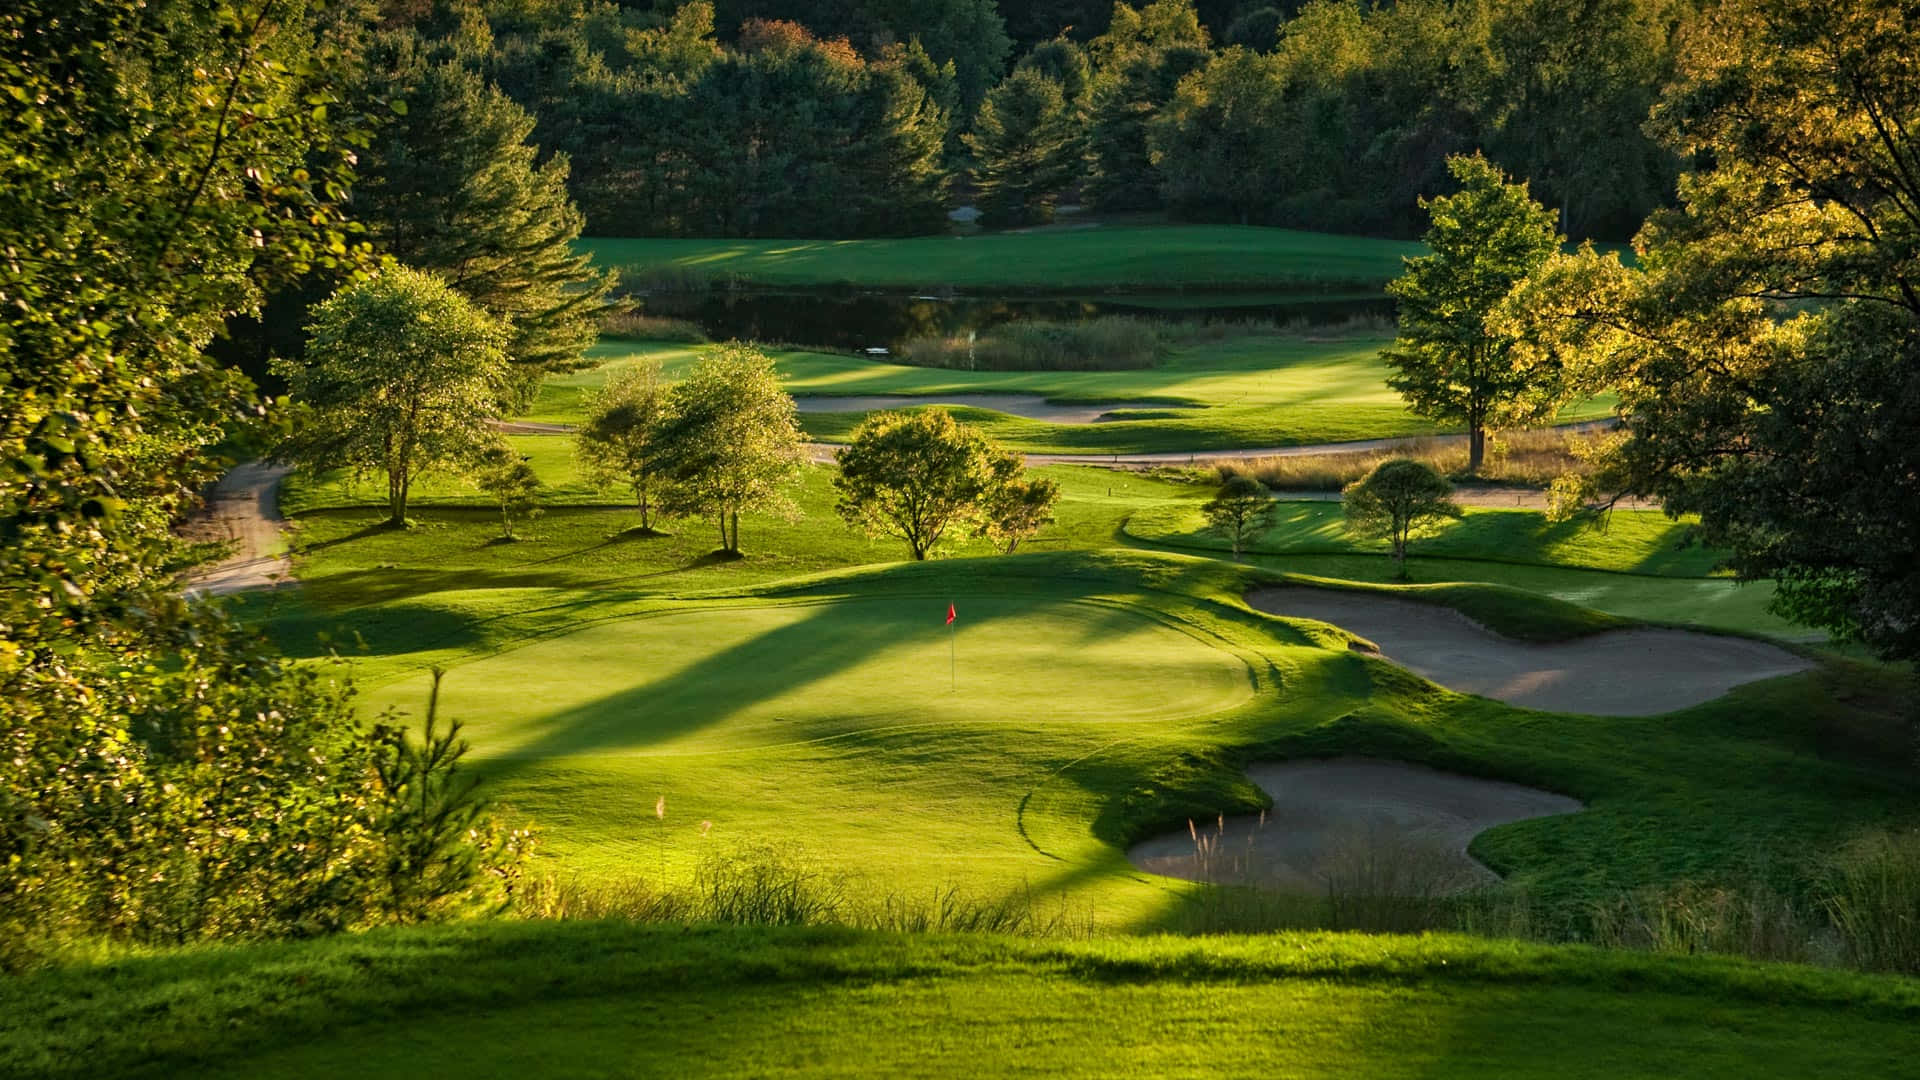 Enjoy a relaxing round of golf at a scenic golf course.